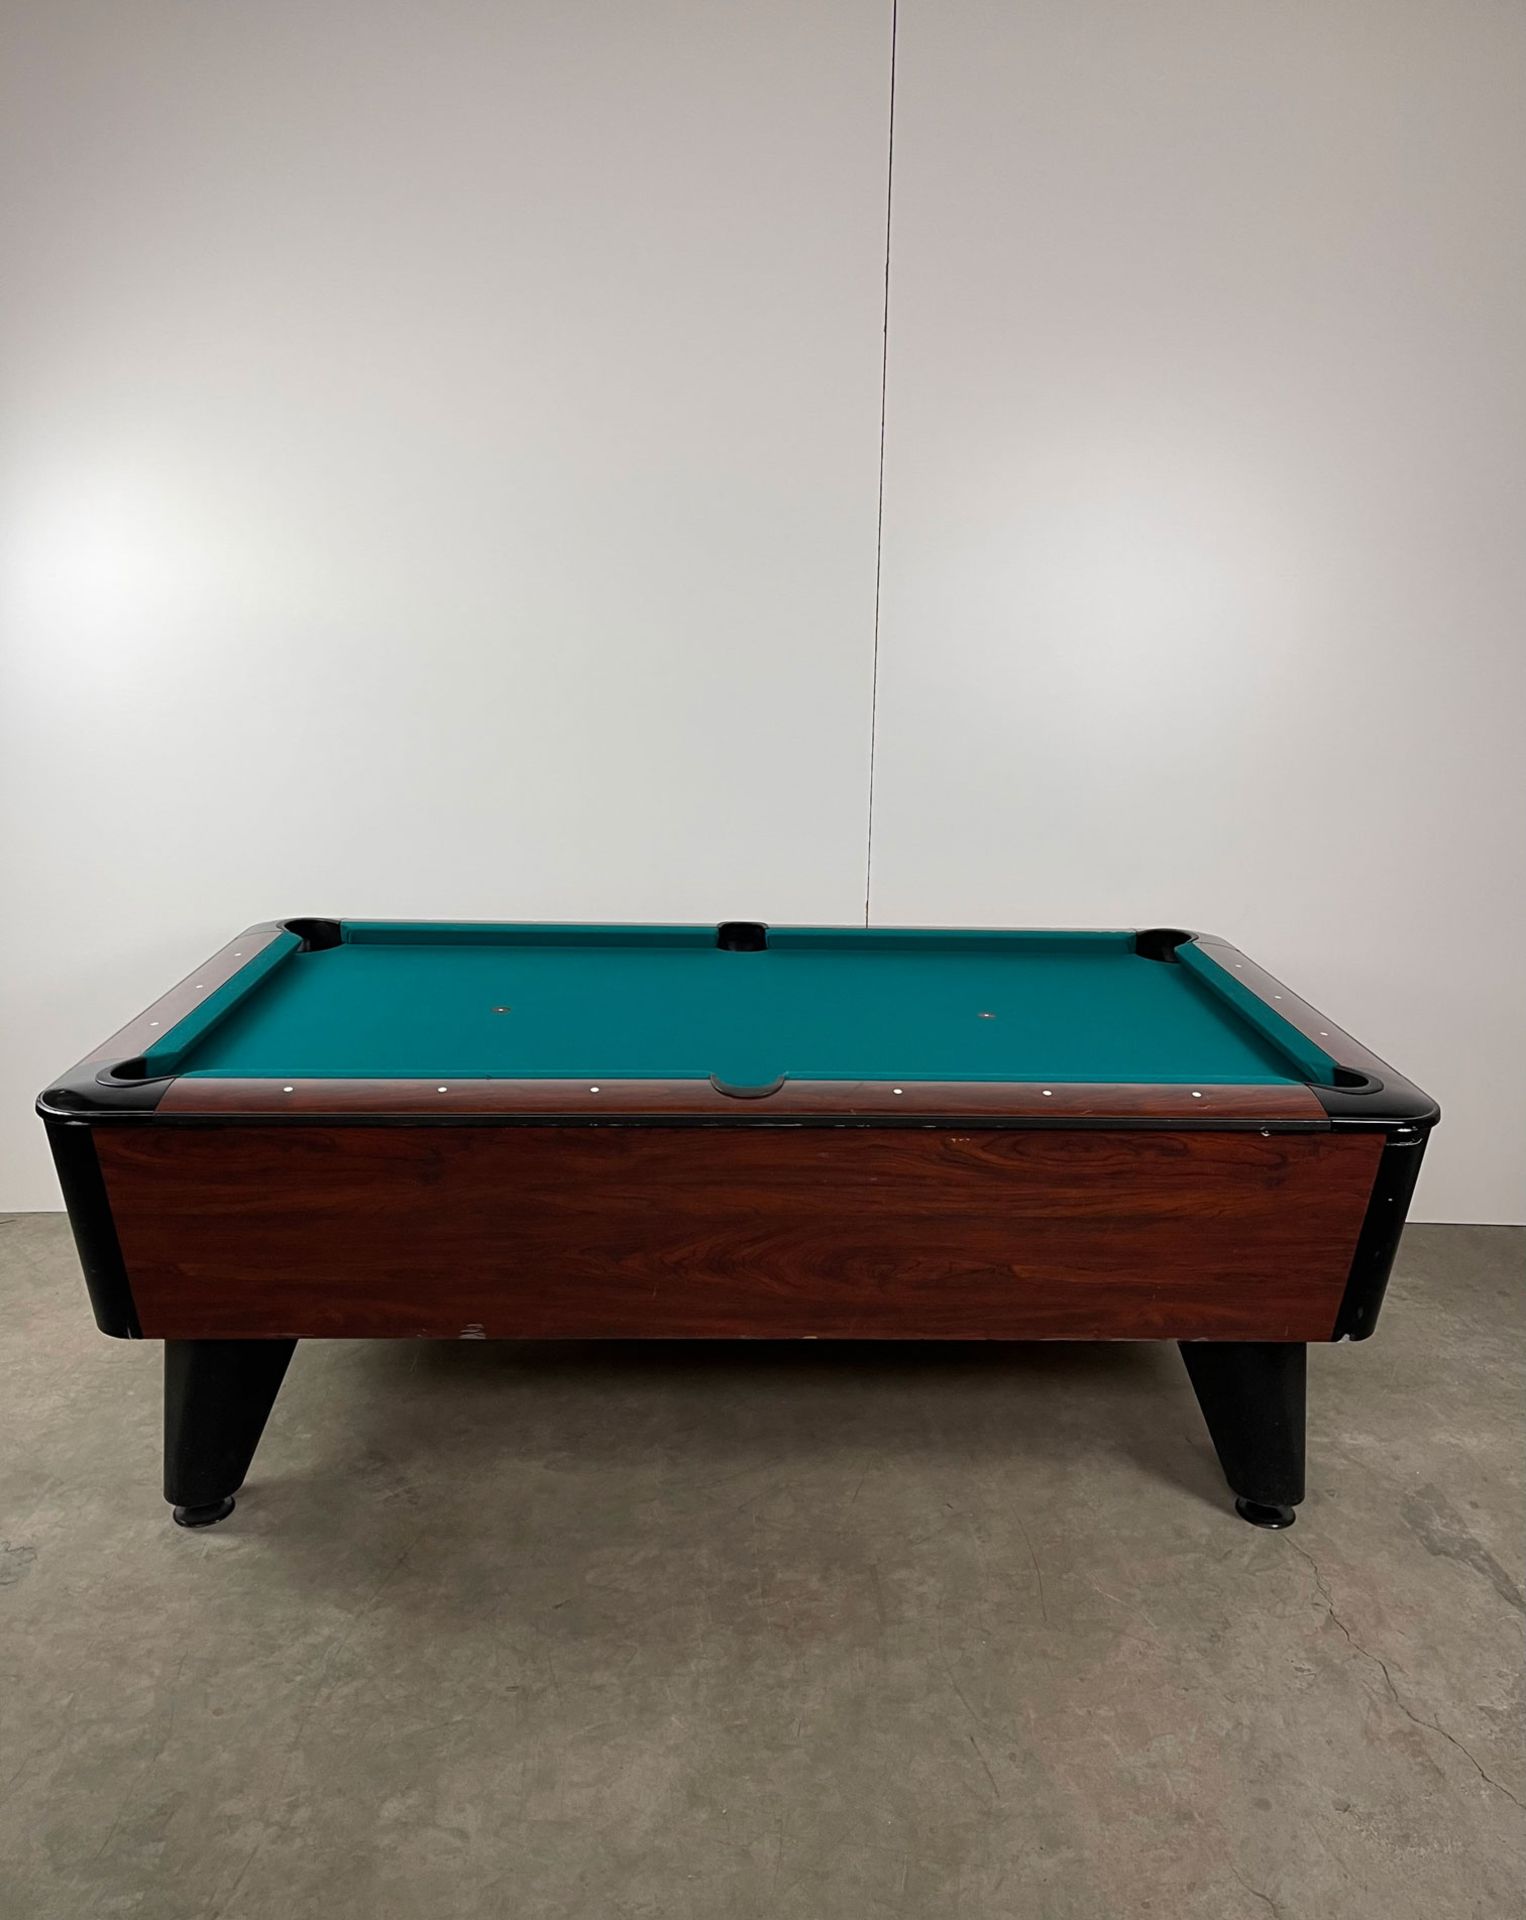 7ft SAM YOWA Coin-Op Billiards Table - Image 2 of 16